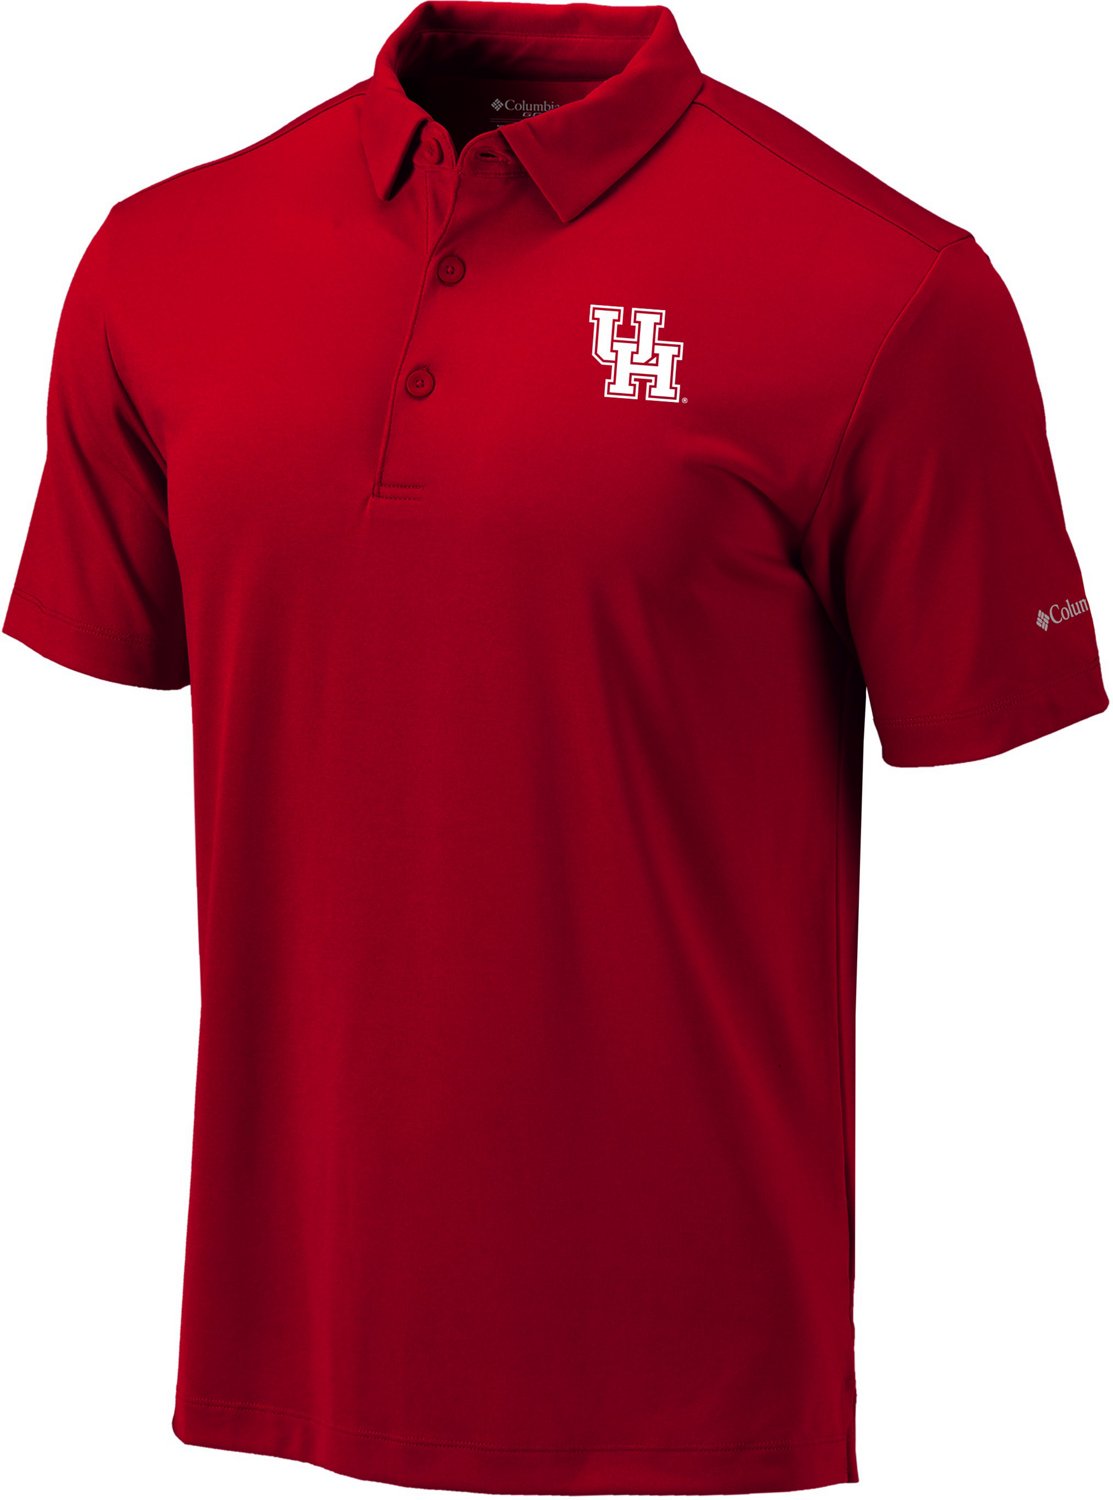 Columbia Sportswear Men's University of Houston Drive Polo Shirt                                                                 - view number 1 selected